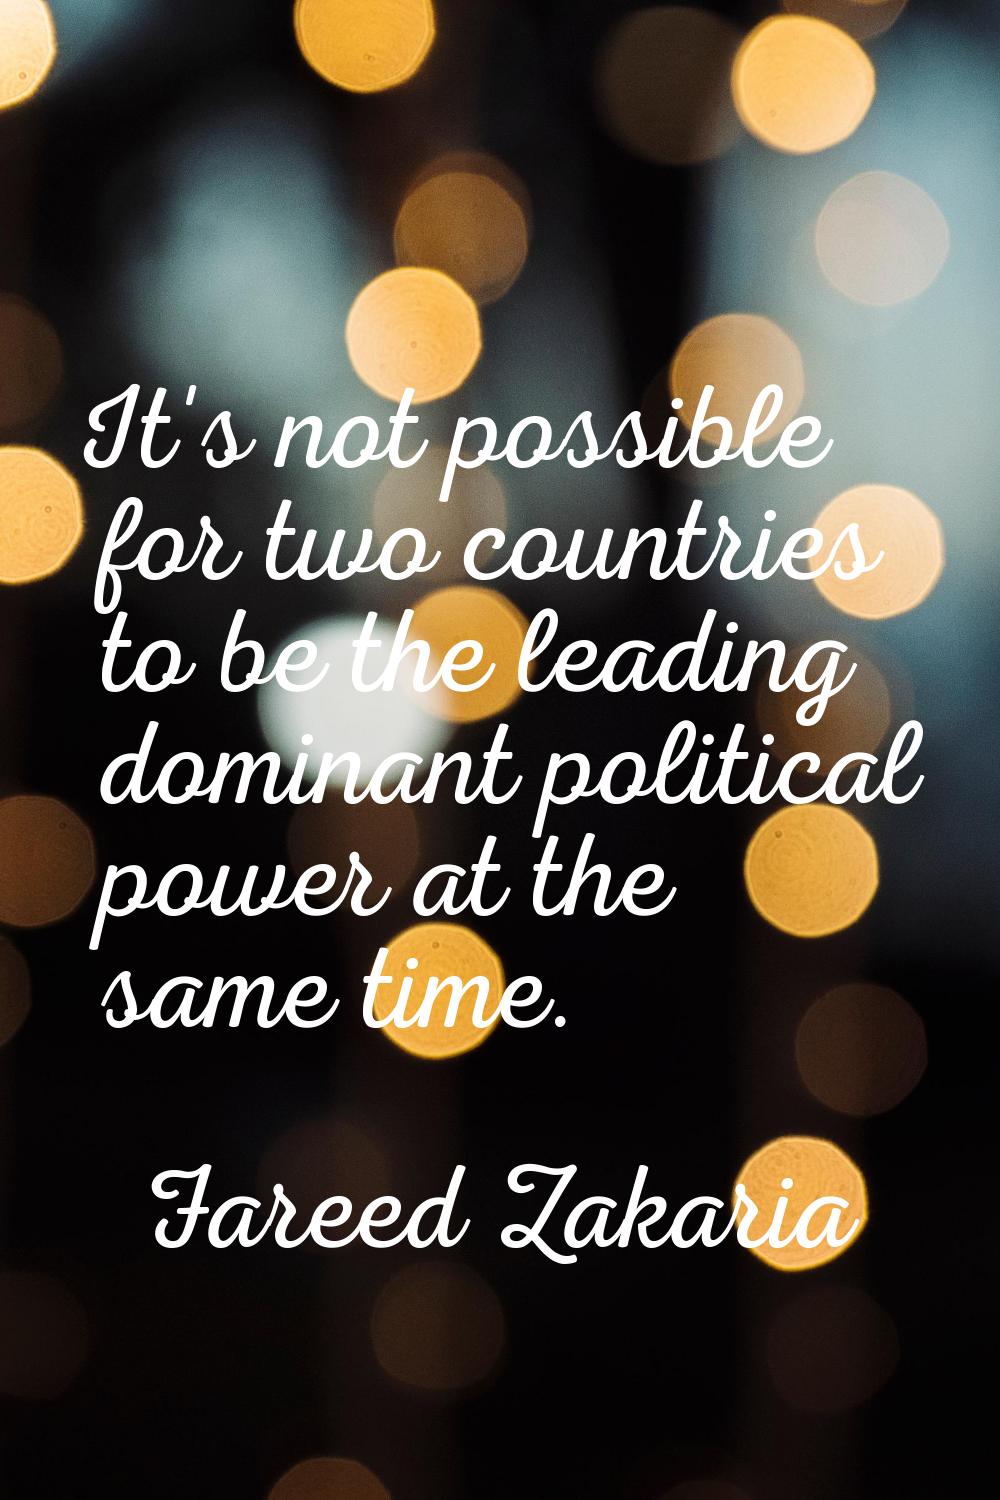 It's not possible for two countries to be the leading dominant political power at the same time.